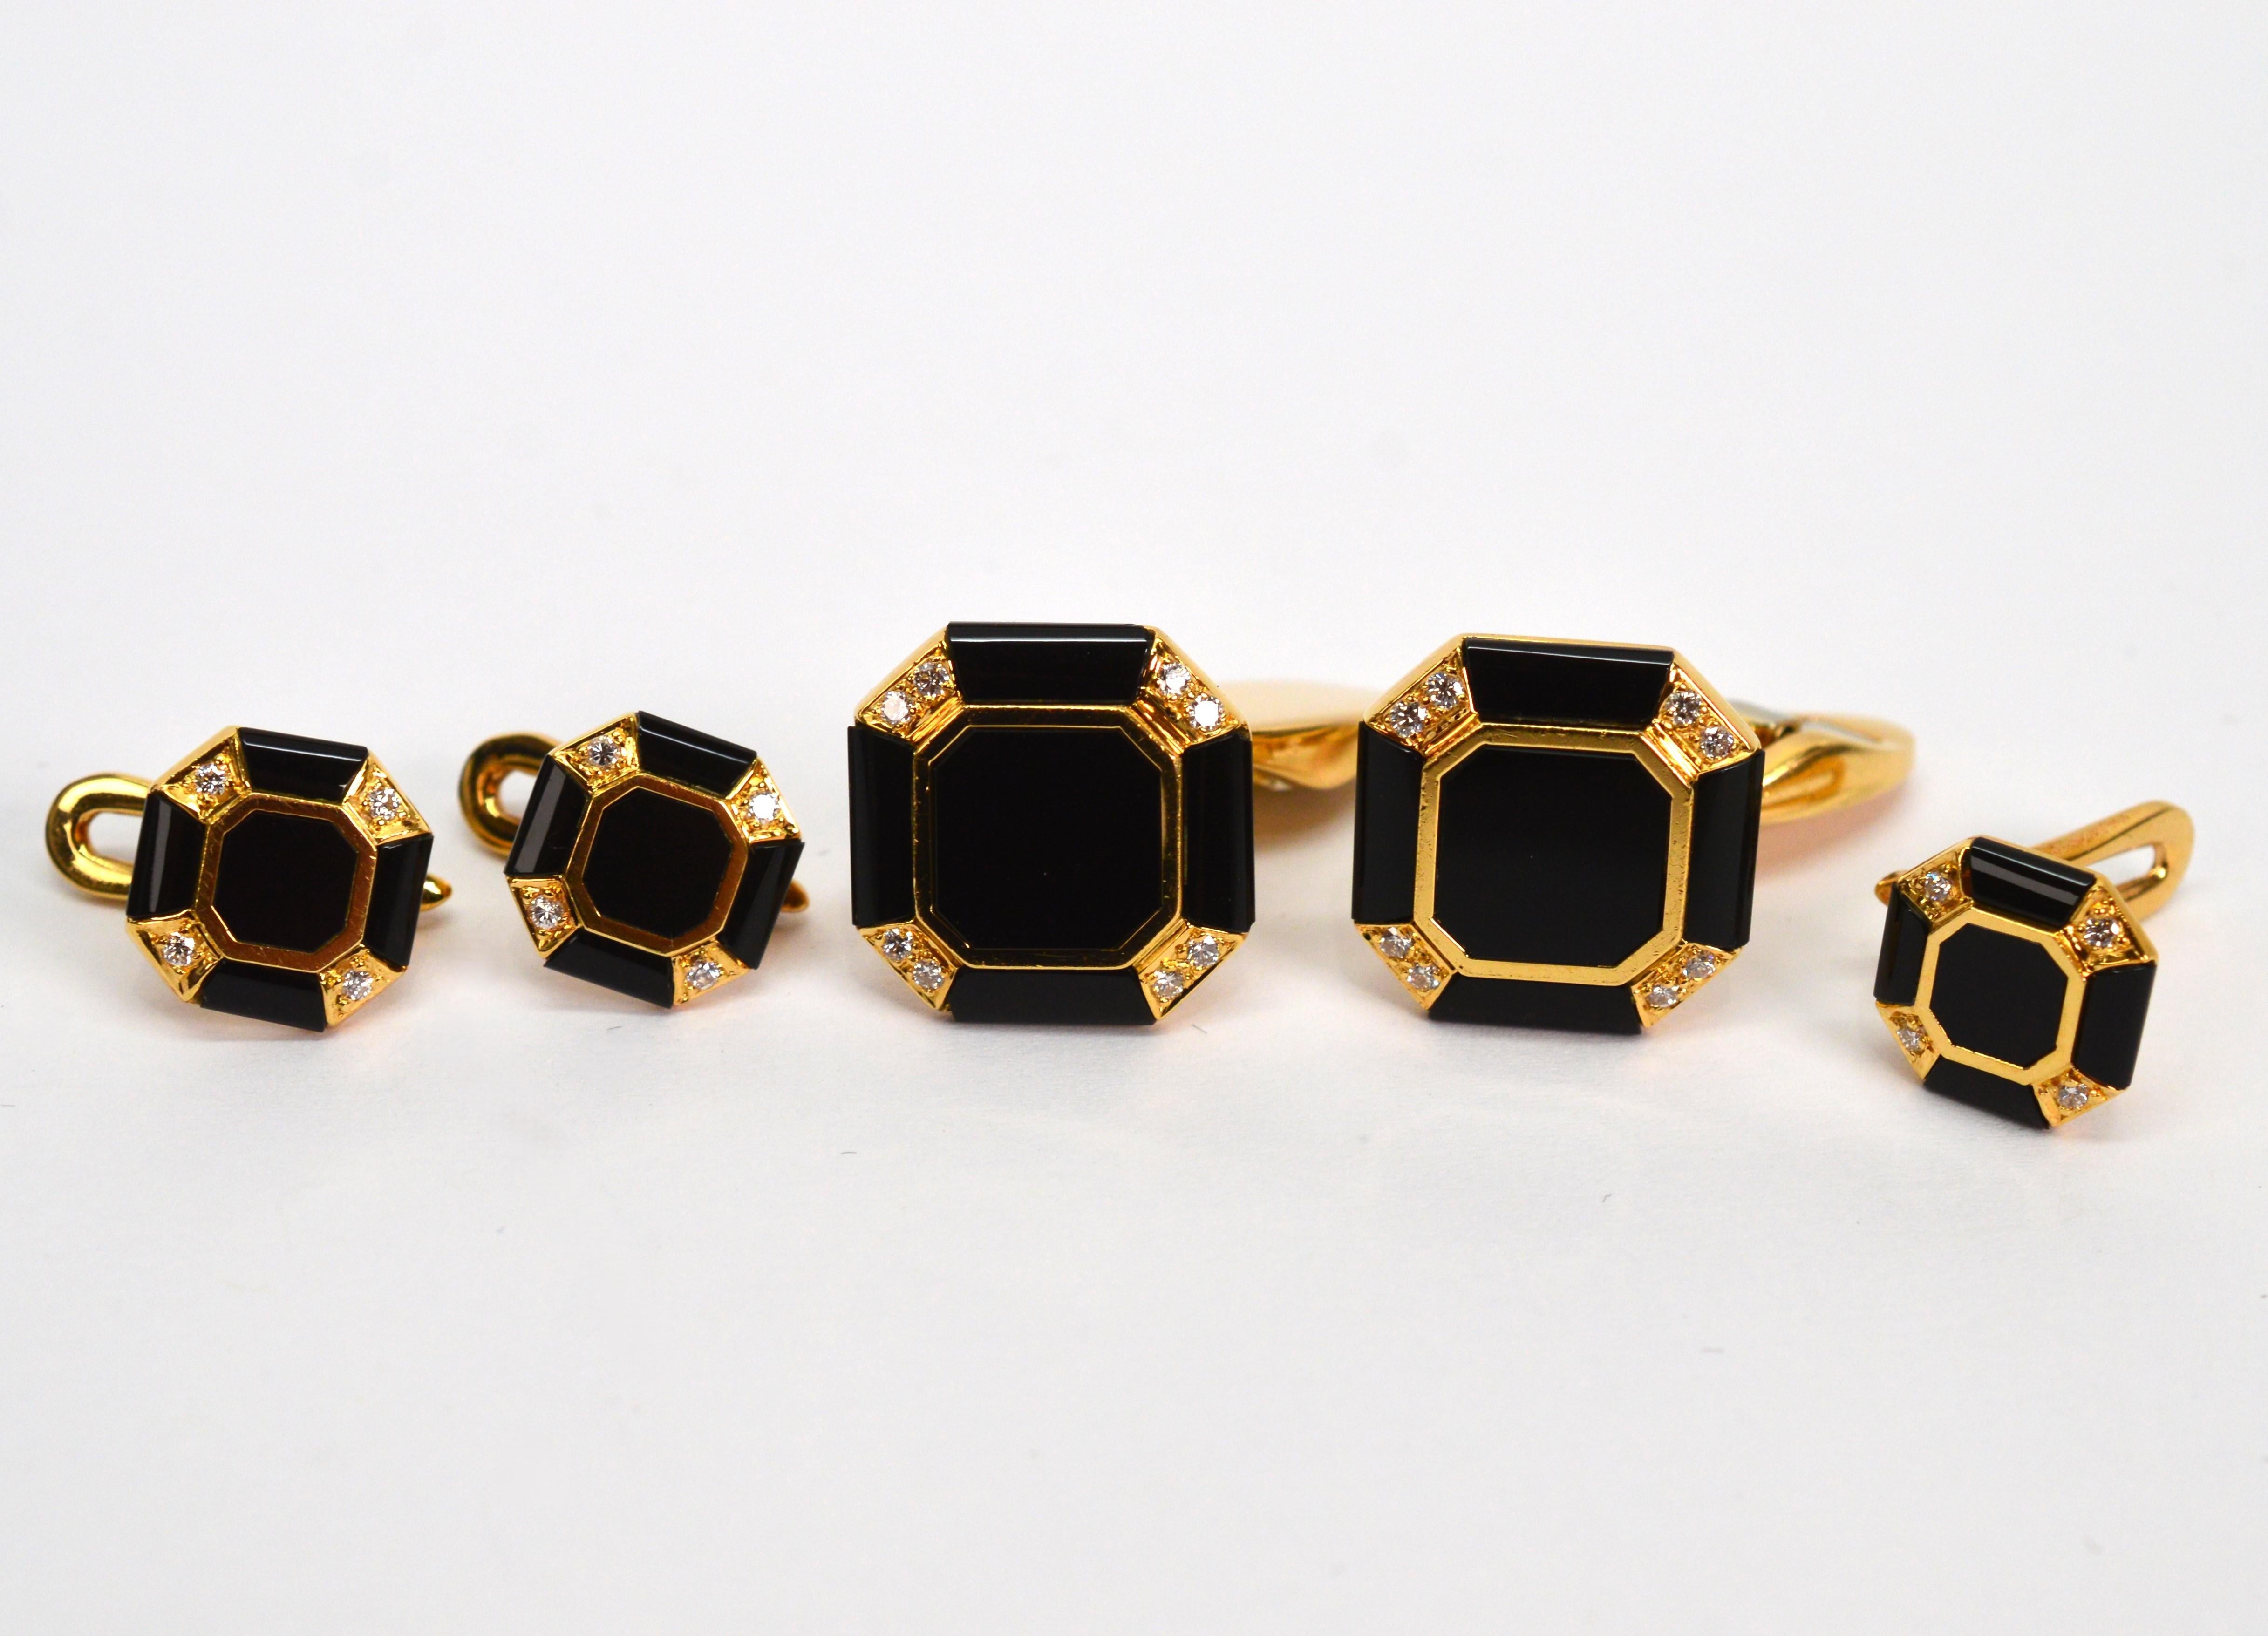 Perfect for the groom or as a formal occasion accessory for that special man. By Tiffany & Co, this fine vintage five piece Octagon Cuff Link and Stud Set in 18 karat yellow gold with black onyx and diamond accents is smart looking in a rich